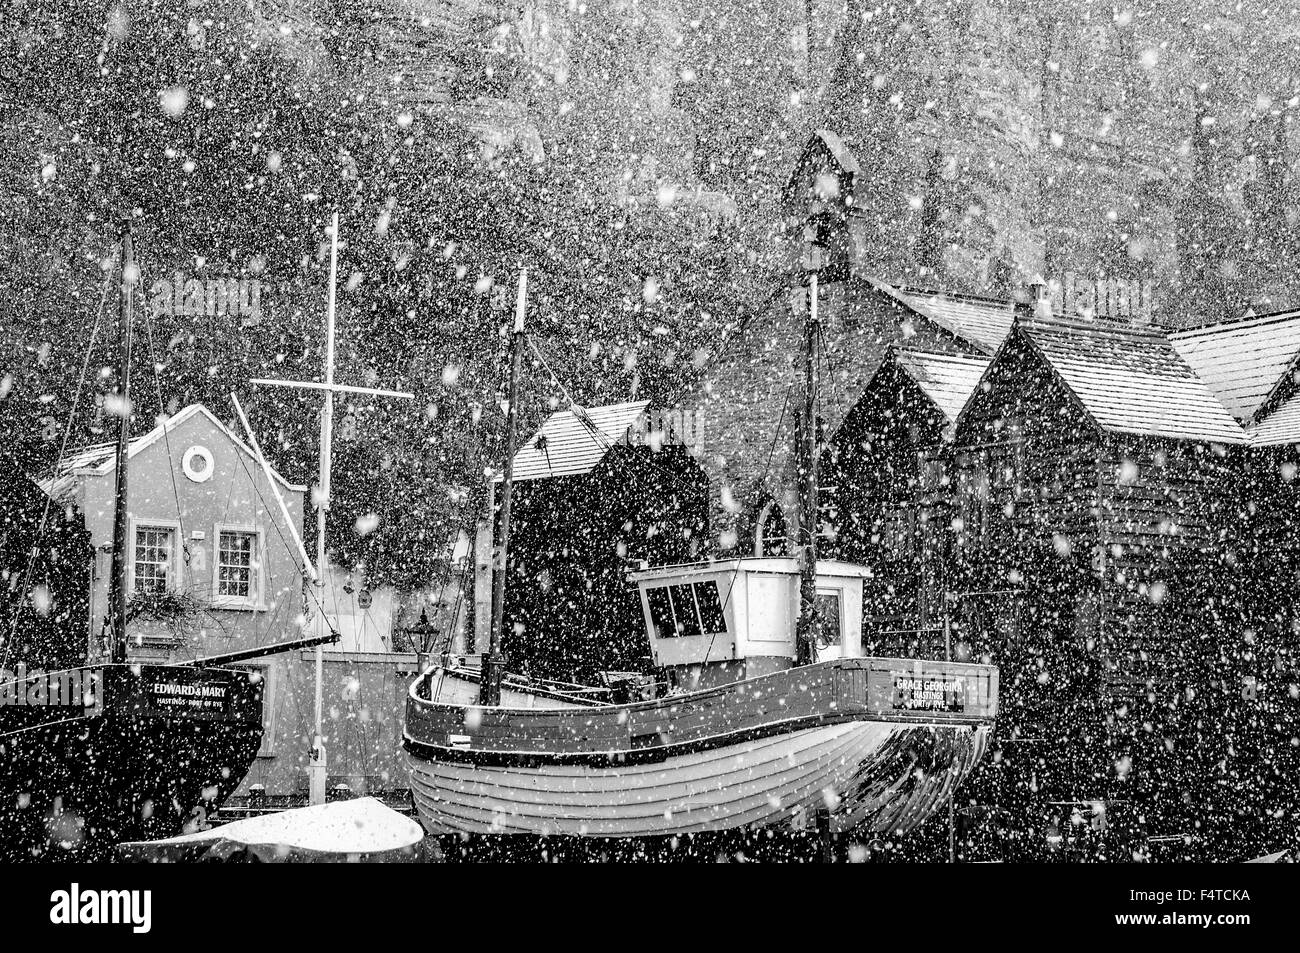 Snowing at Rock-a-Nore. Old town Hastings. England.UK Stock Photo